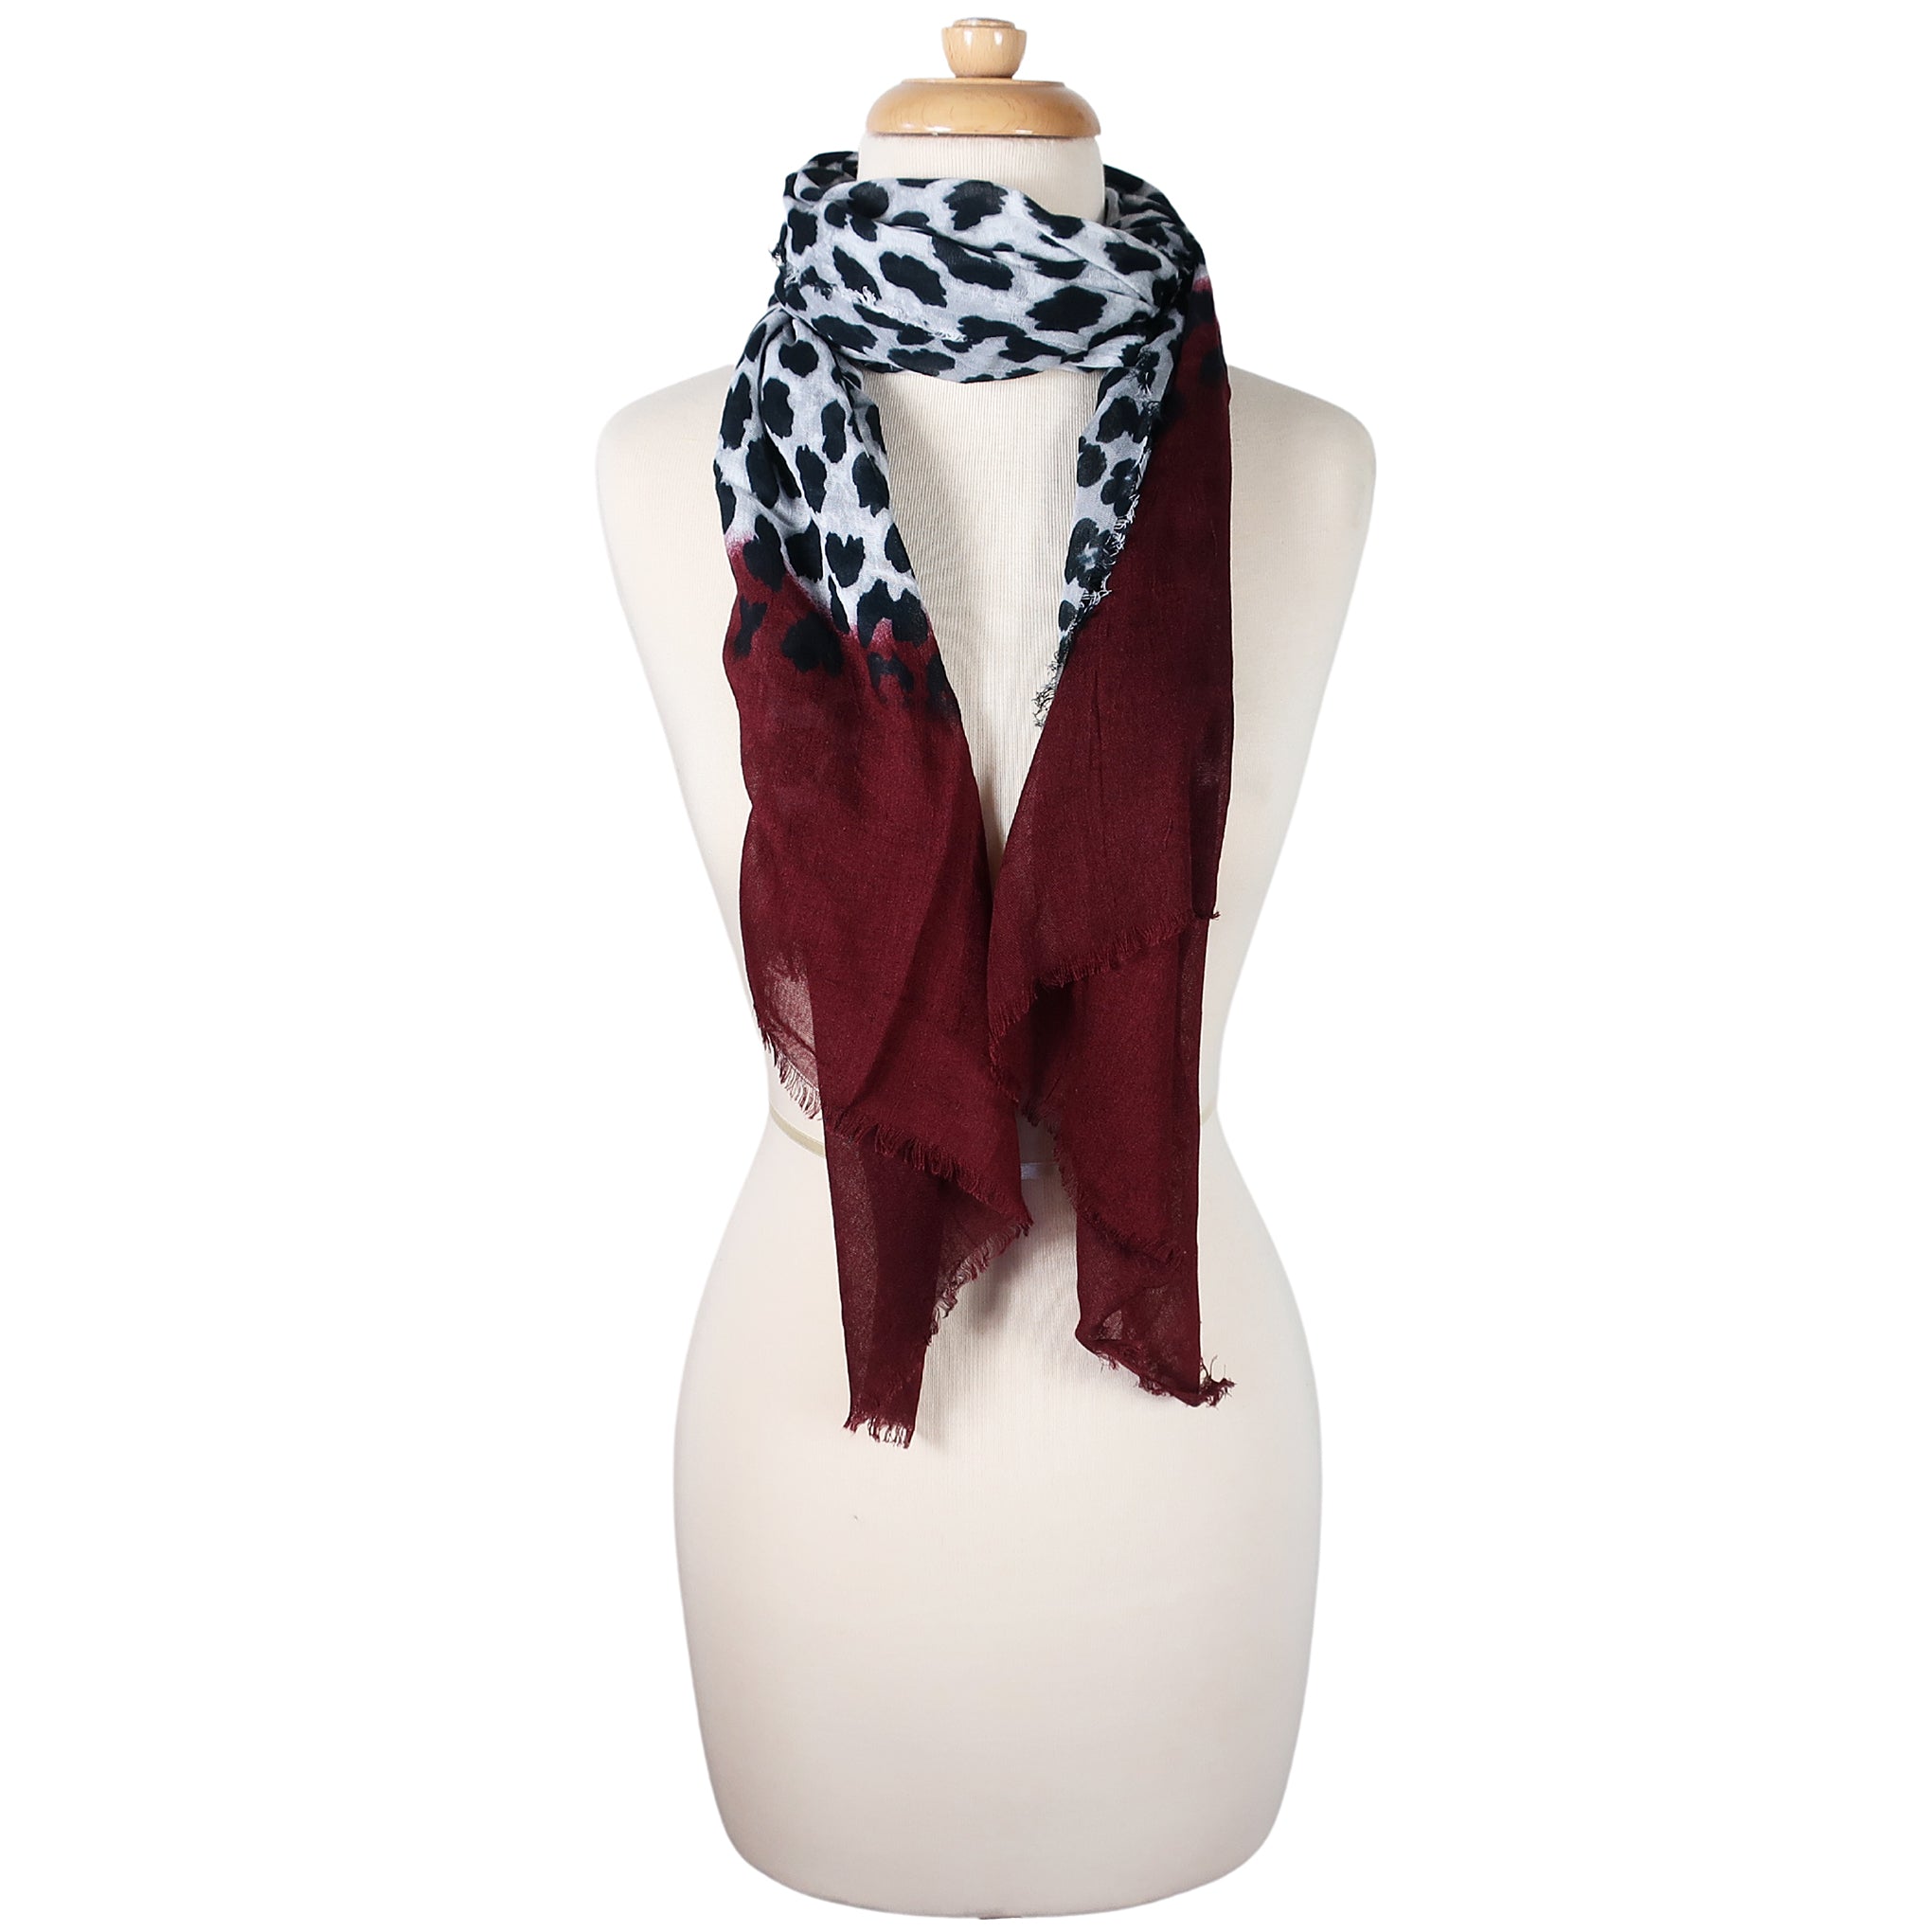 Blue Pacific Animal Print Cashmere Silk Scarf in Burgundy and Snow 78 x 22